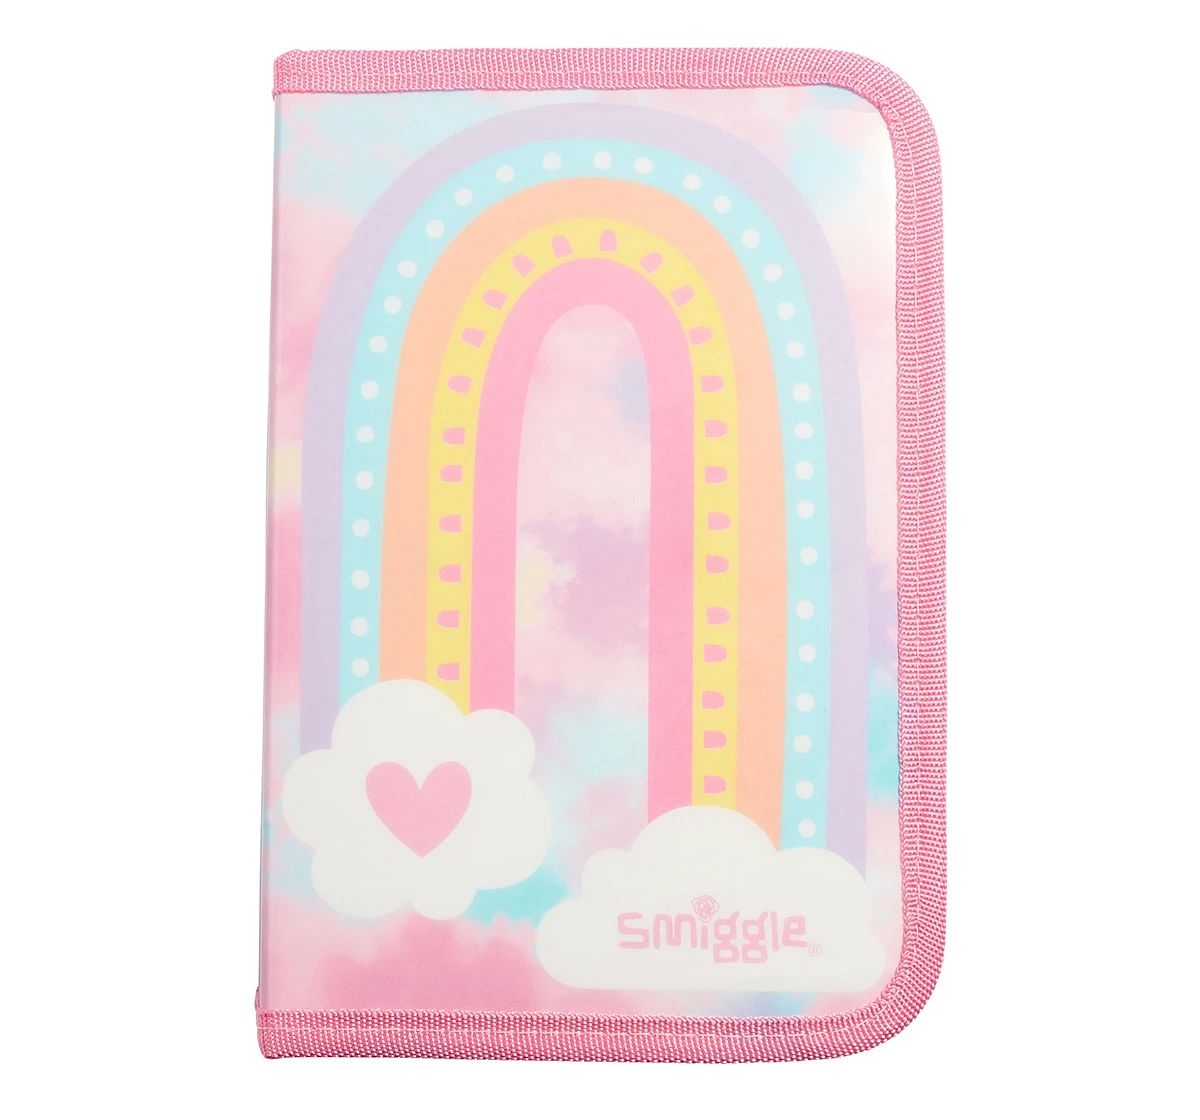 Smiggle Bright Side Midi Stationery Kit for Kids 3Y+, Pink